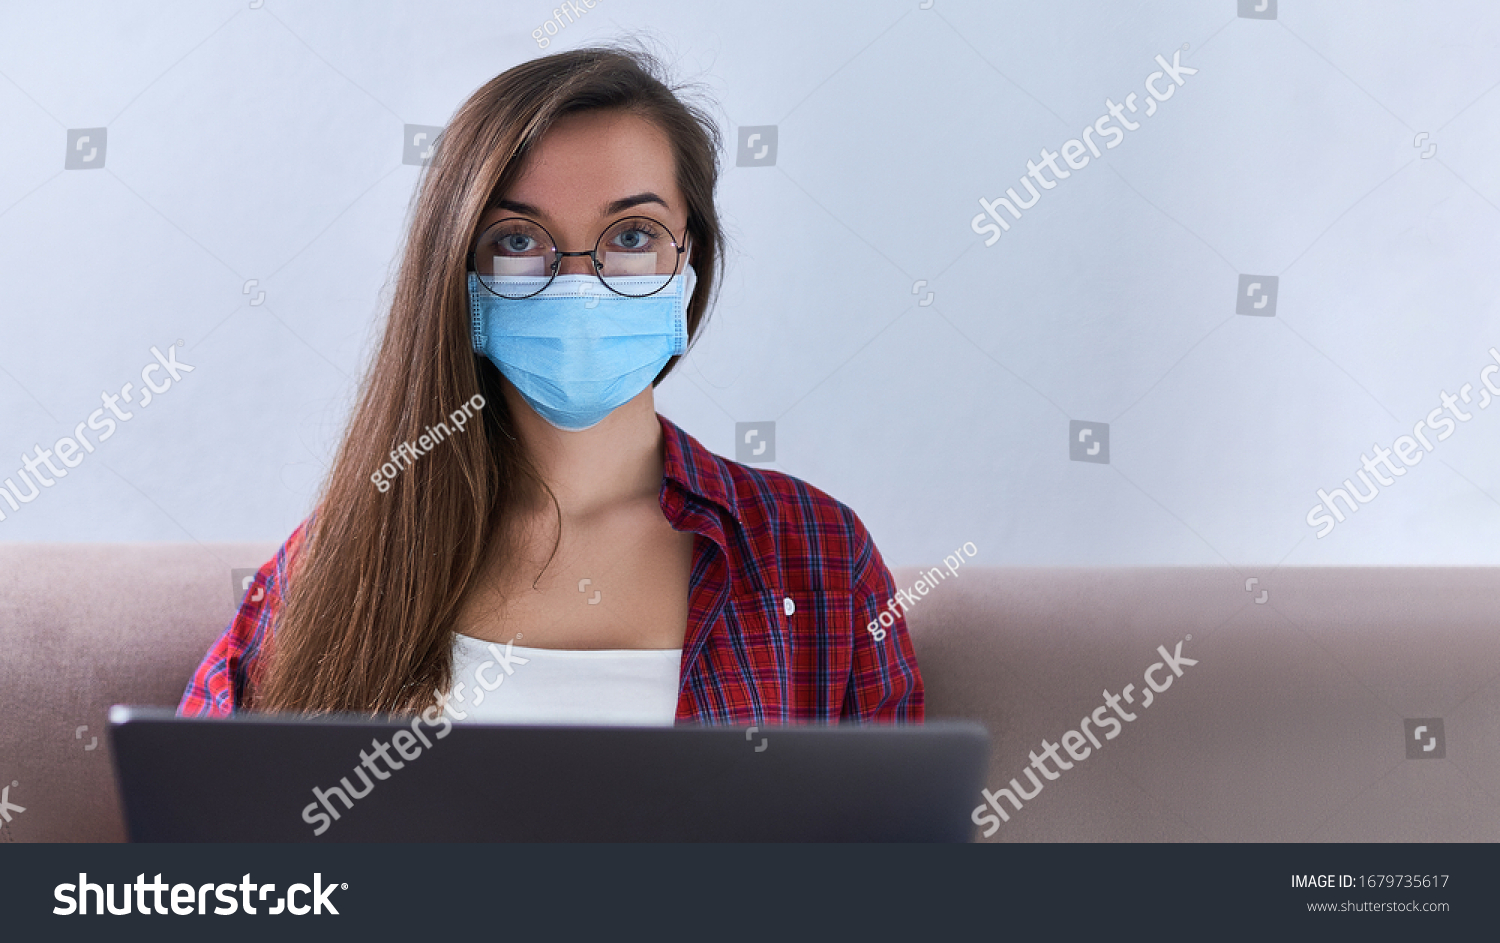 Business woman in round glasses wears medical protective mask working from home at the computer during self-isolation and quarantine. Coronavirus outbreak and covid epidemic. Stay home. Copy space #1679735617